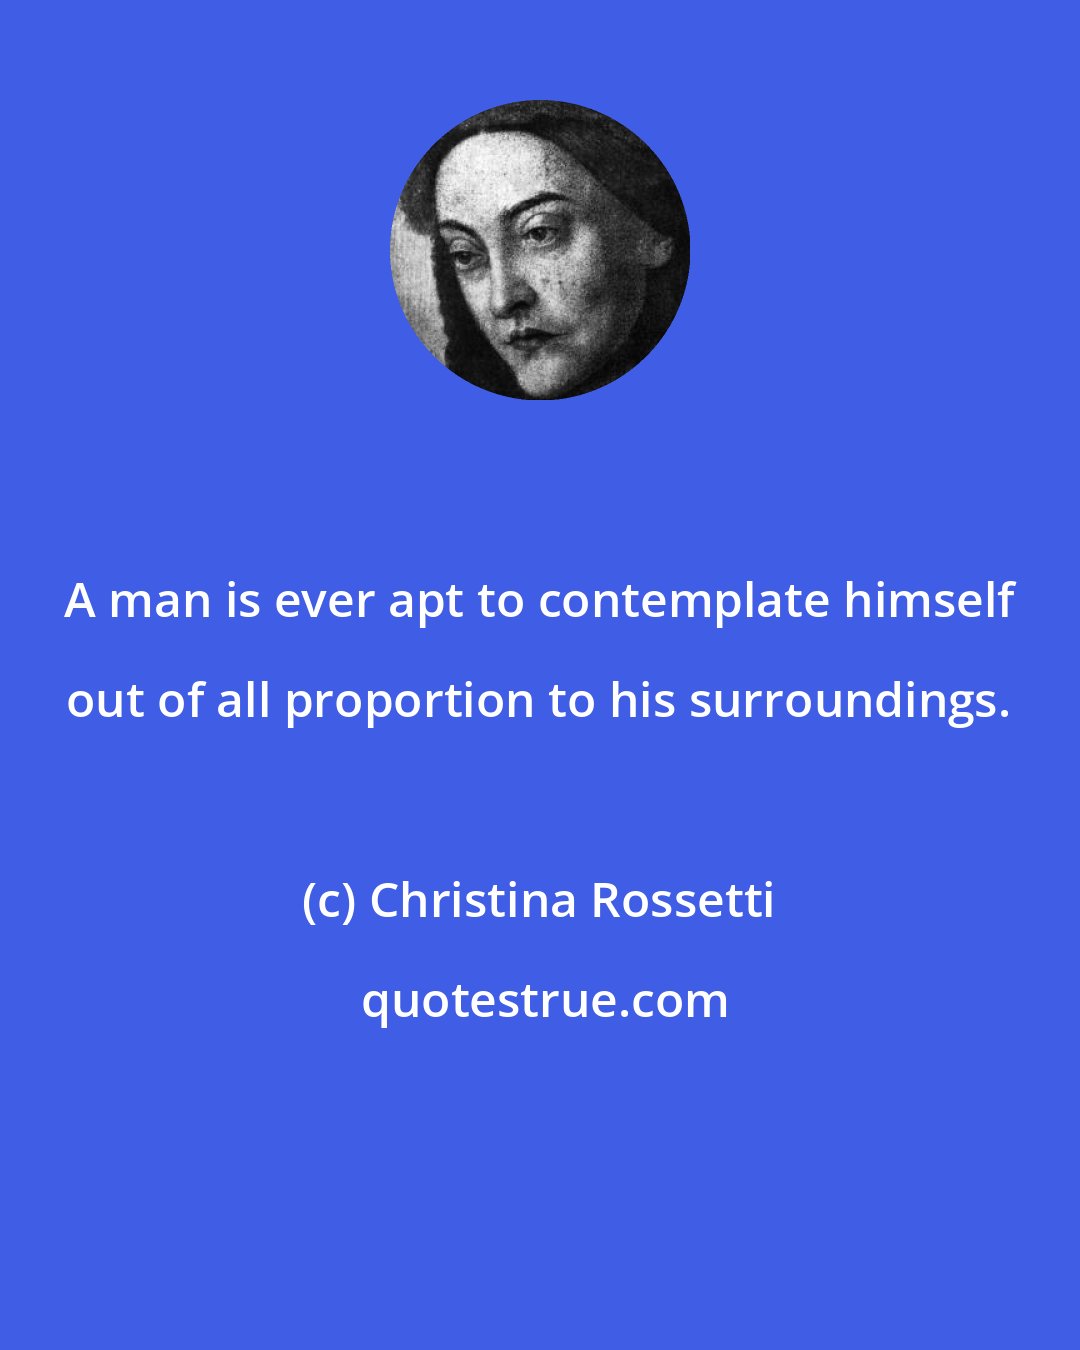 Christina Rossetti: A man is ever apt to contemplate himself out of all proportion to his surroundings.